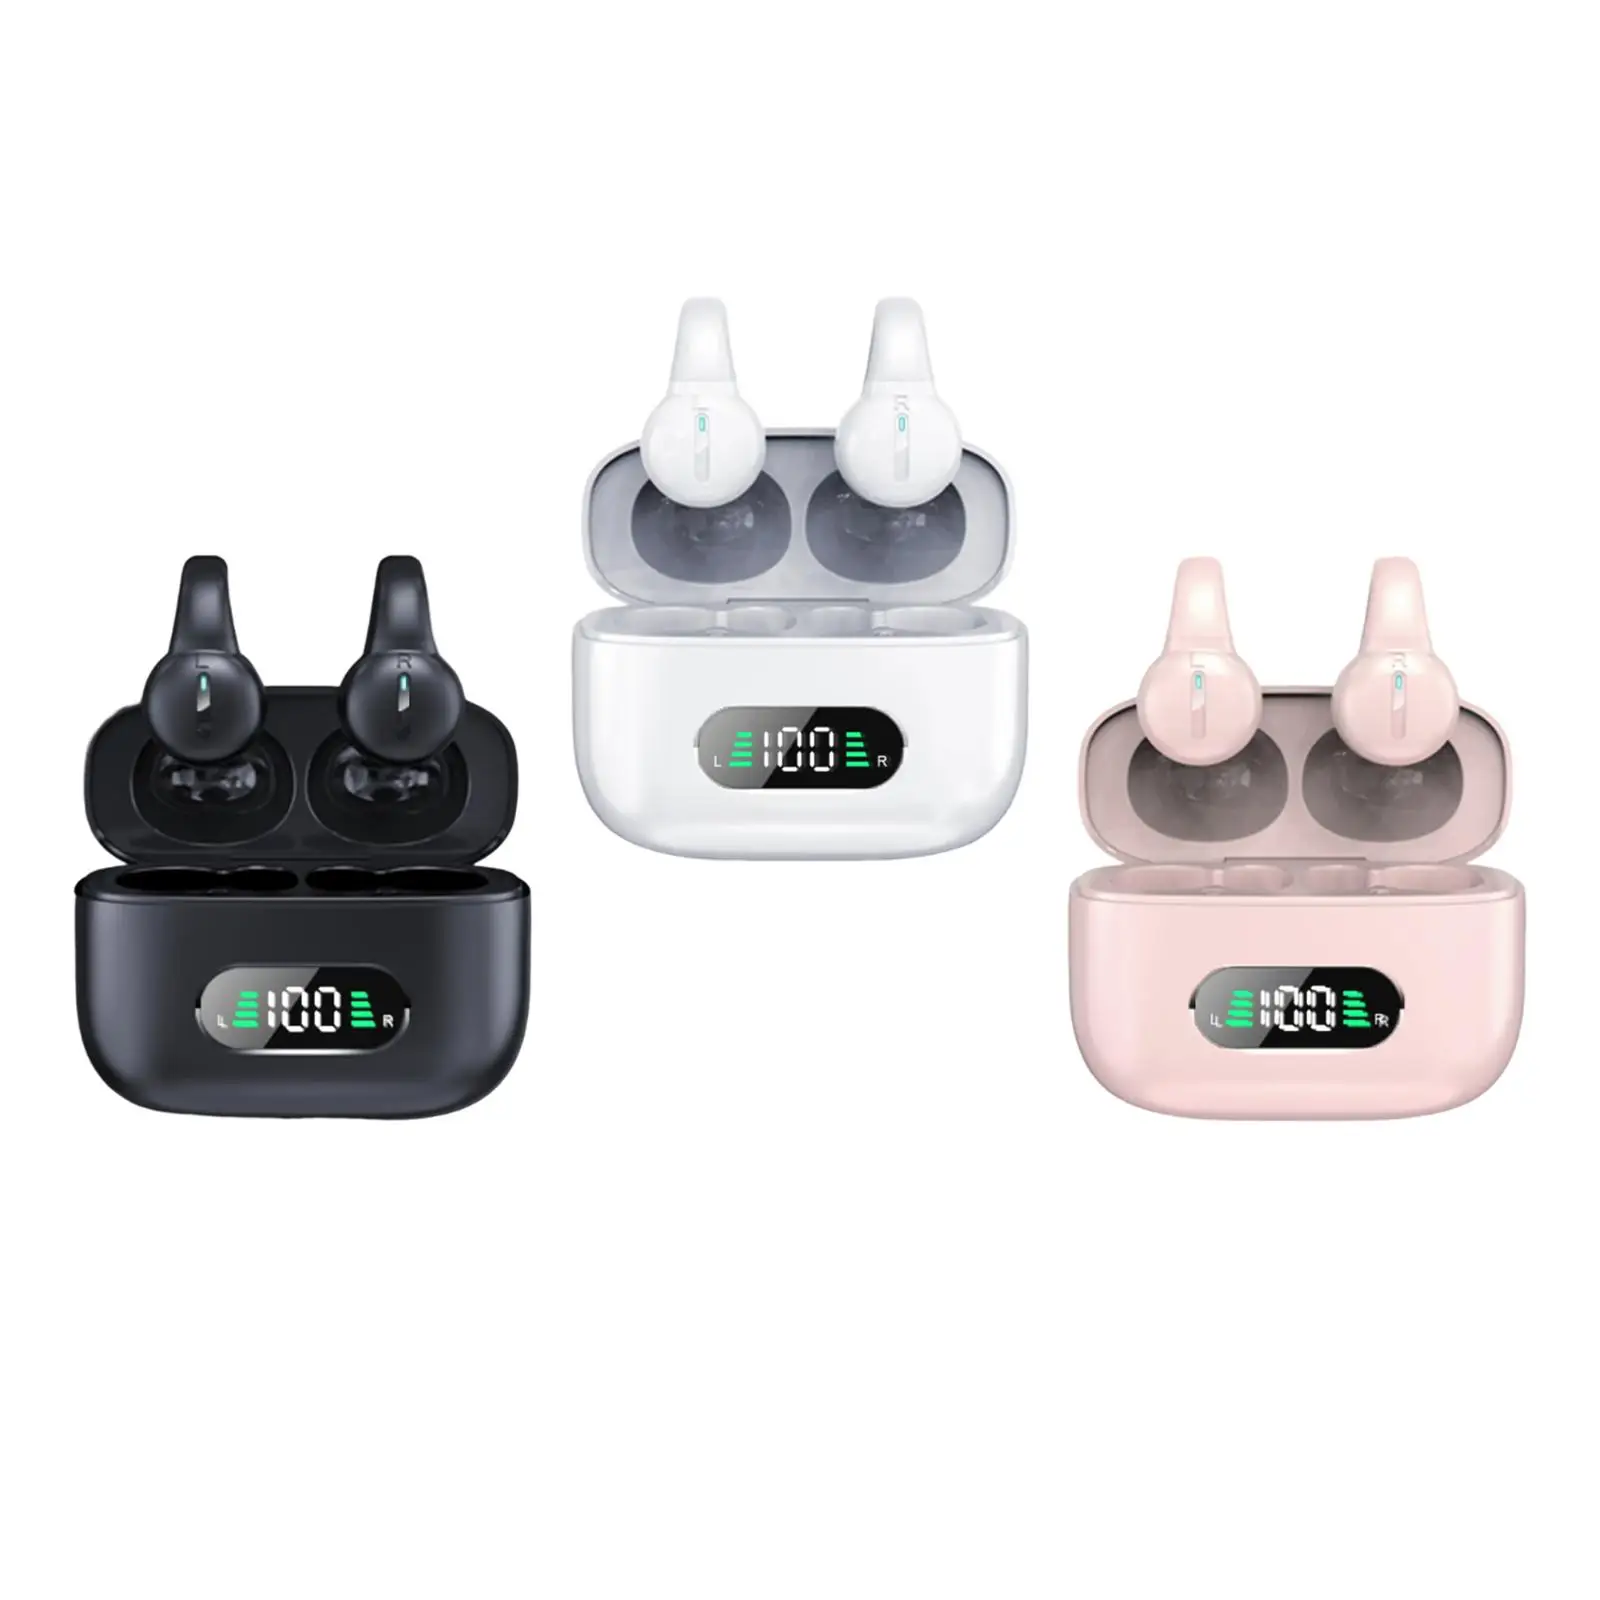 Ear Clip Headphone for Cycling Driving Waterproof Outer Headphones LED Display Sport Earbuds Headset with Case Open Ear Earbuds